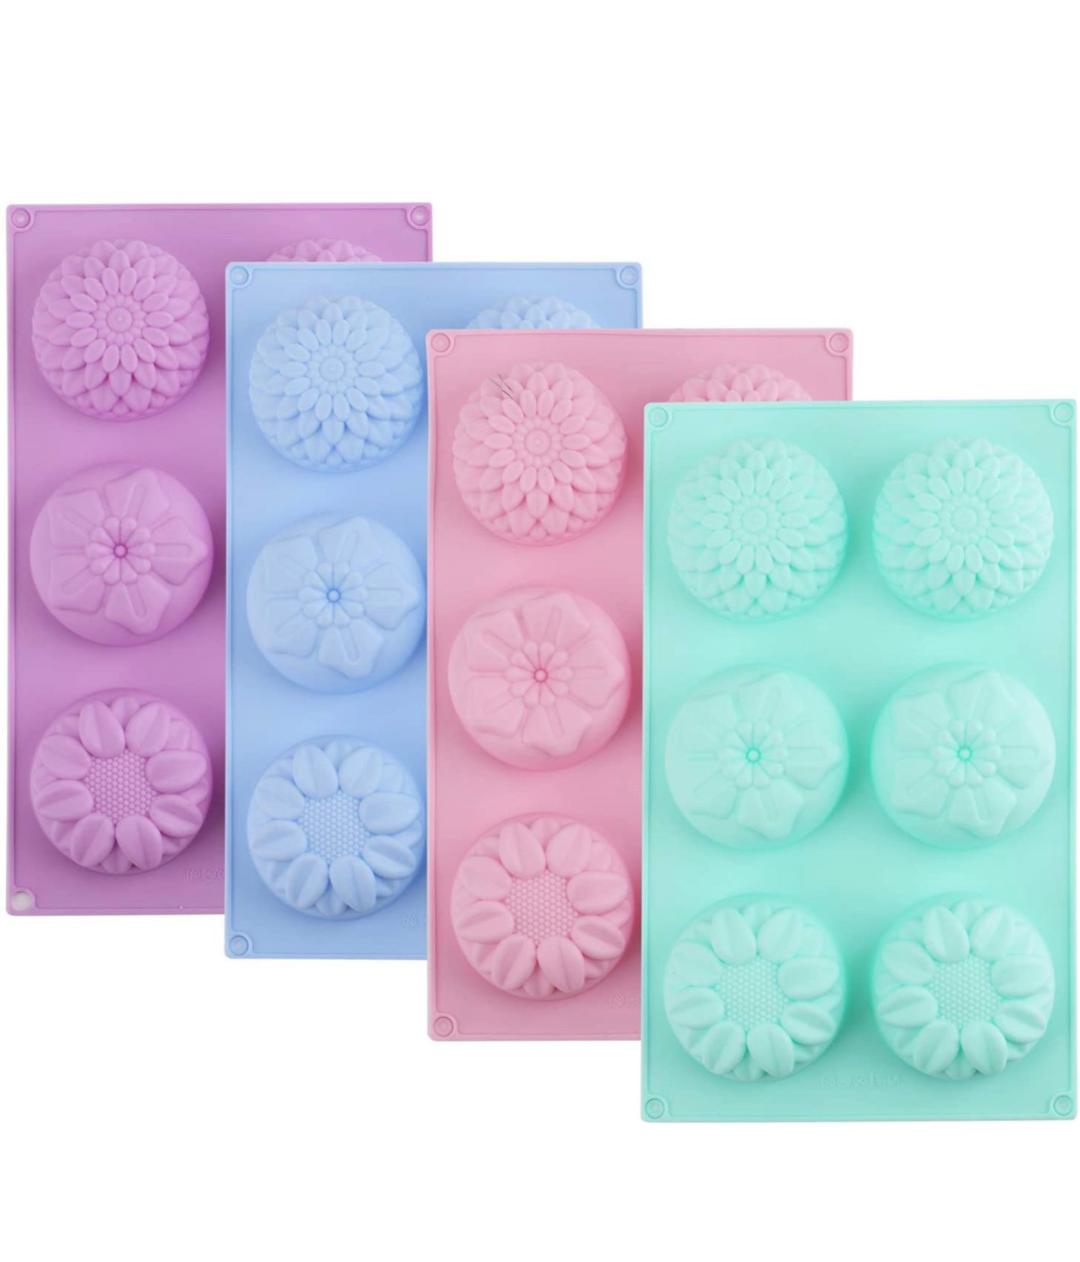 Large Assorted Flower Silicone Mold